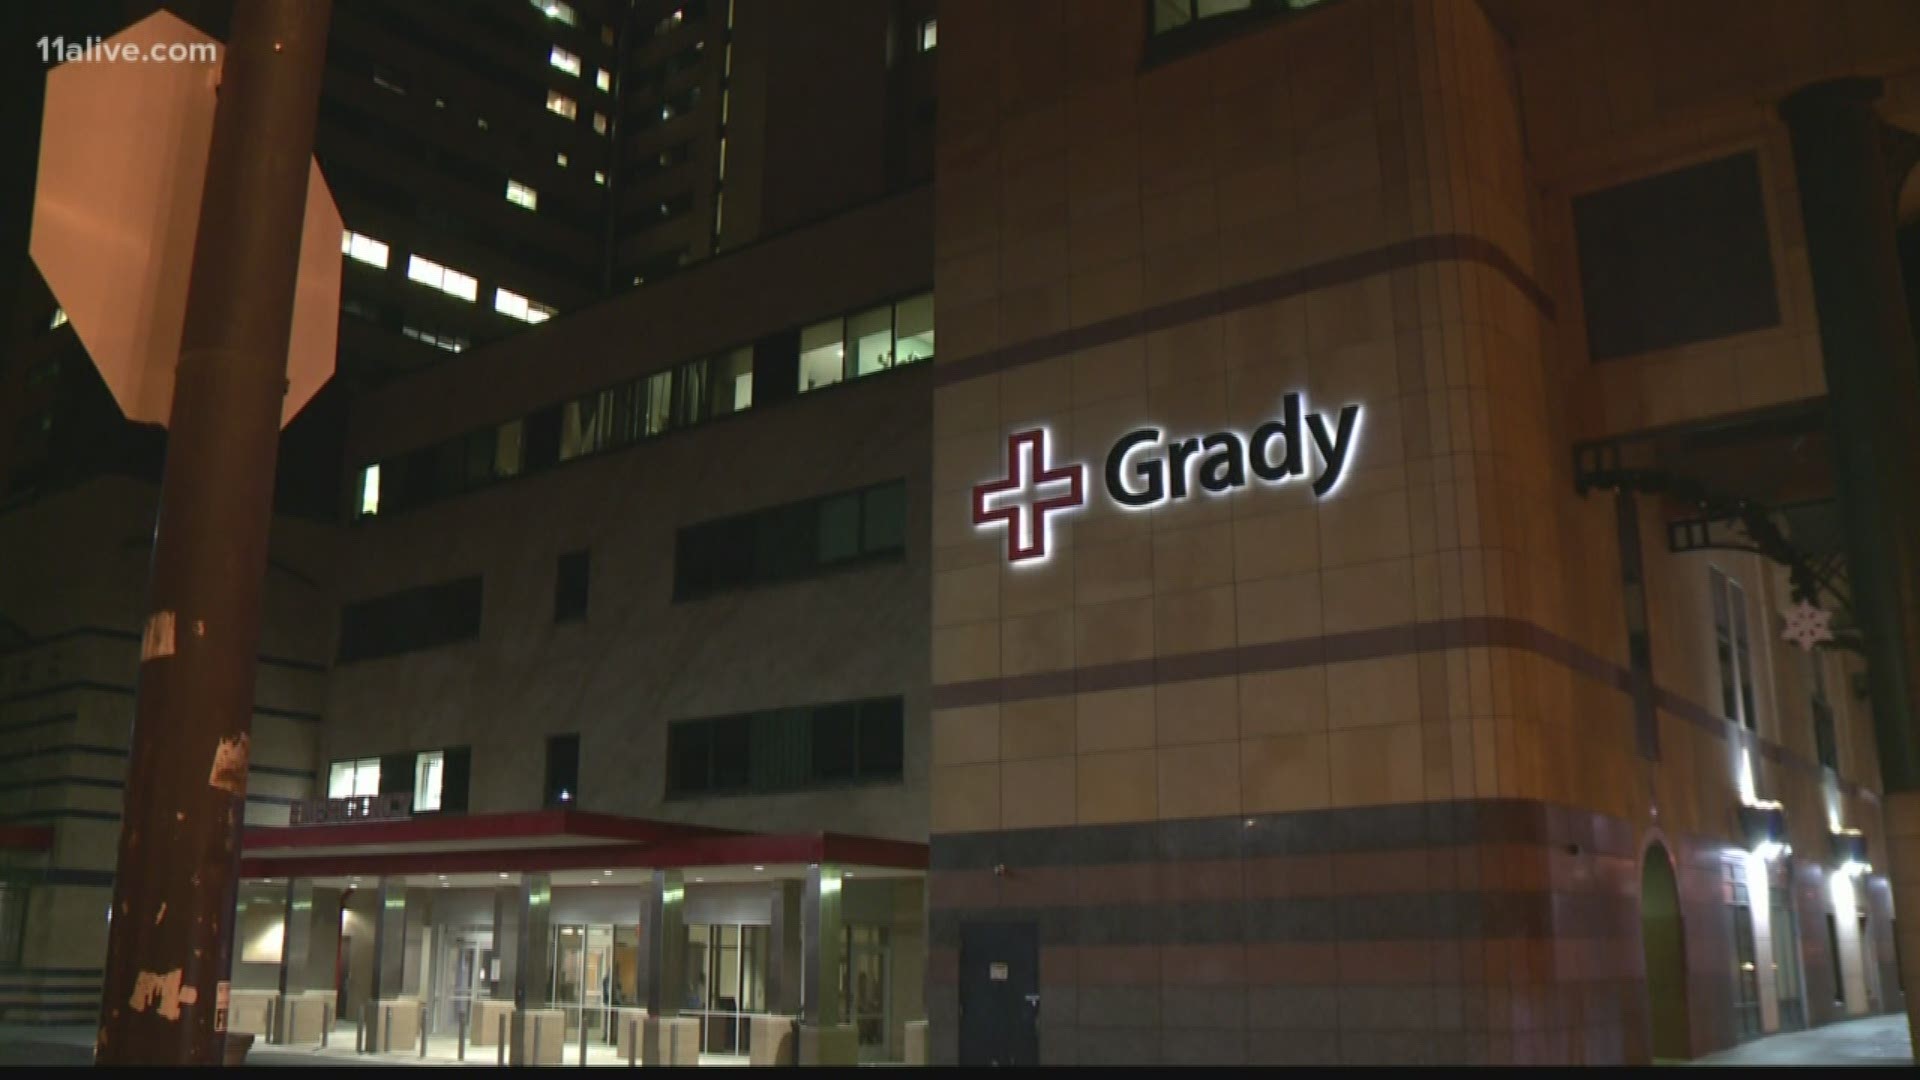 More than 100 patients were evacuated following a water main break at Grady Memorial Hospital on Saturday afternoon. Repairs are not expected until Wednesday.